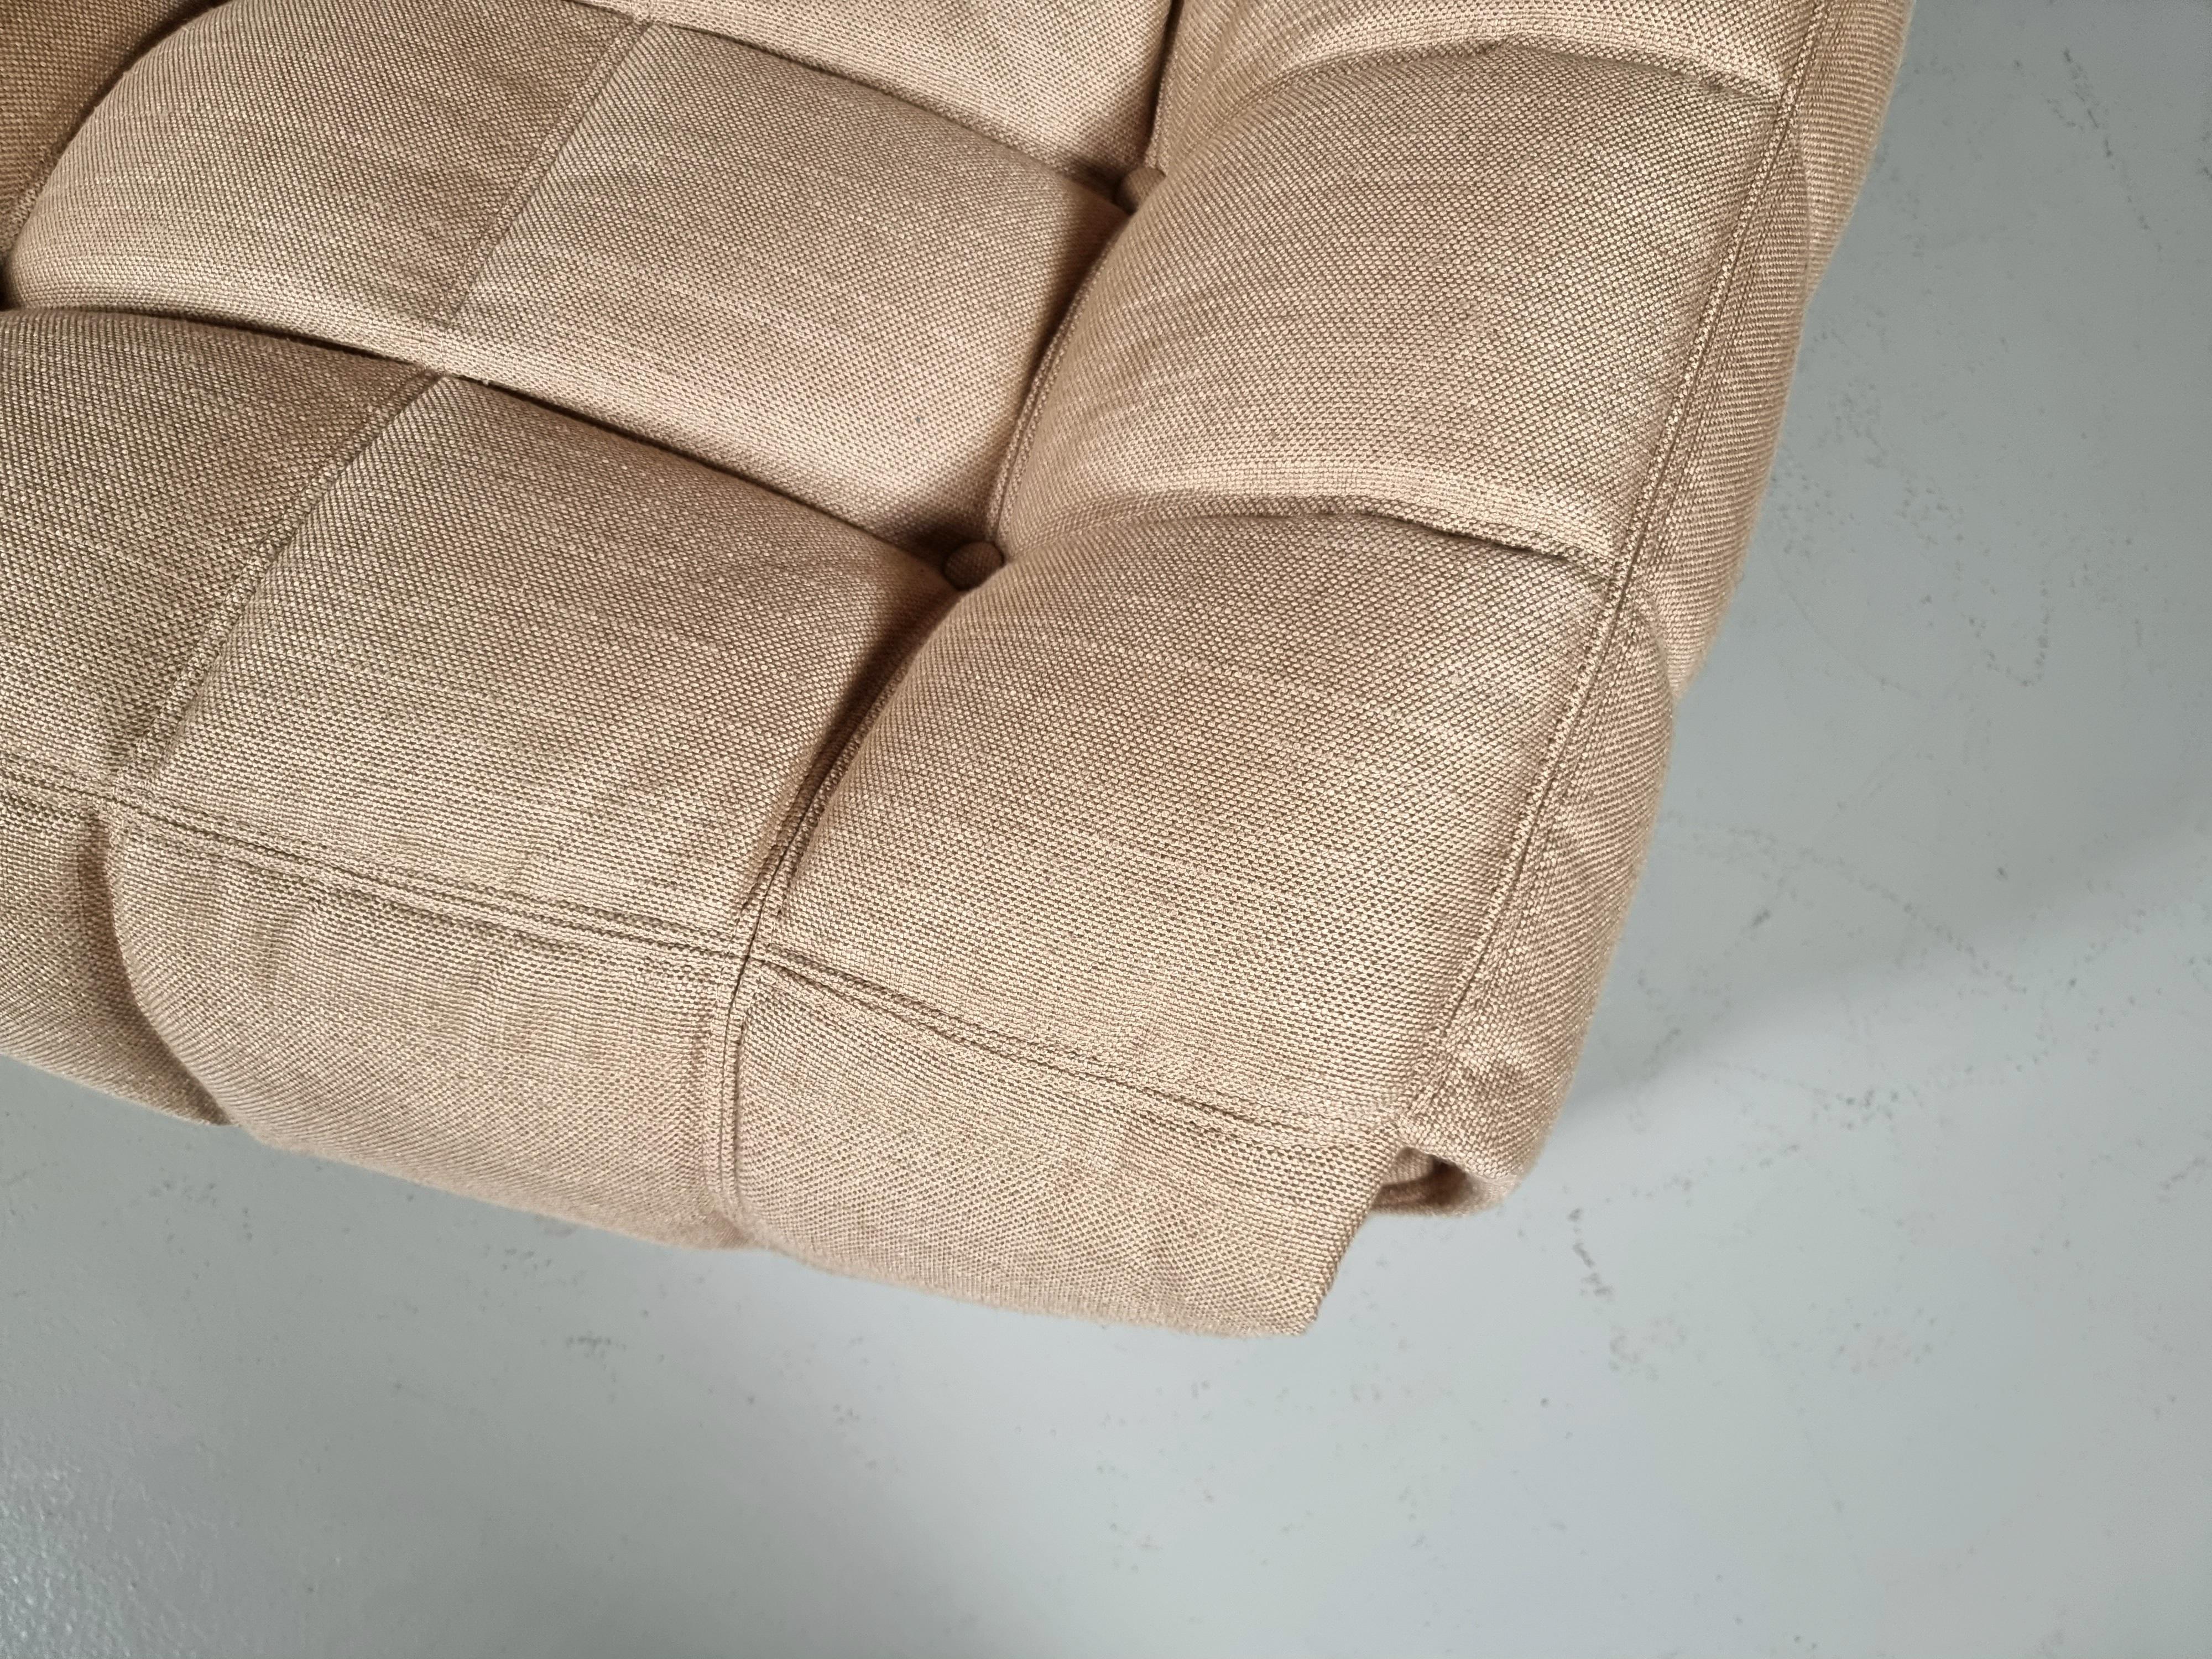 Kashima 2-Seater Sofa by Michel Ducaroy for Ligne Roset, 1970s In Excellent Condition For Sale In amstelveen, NL